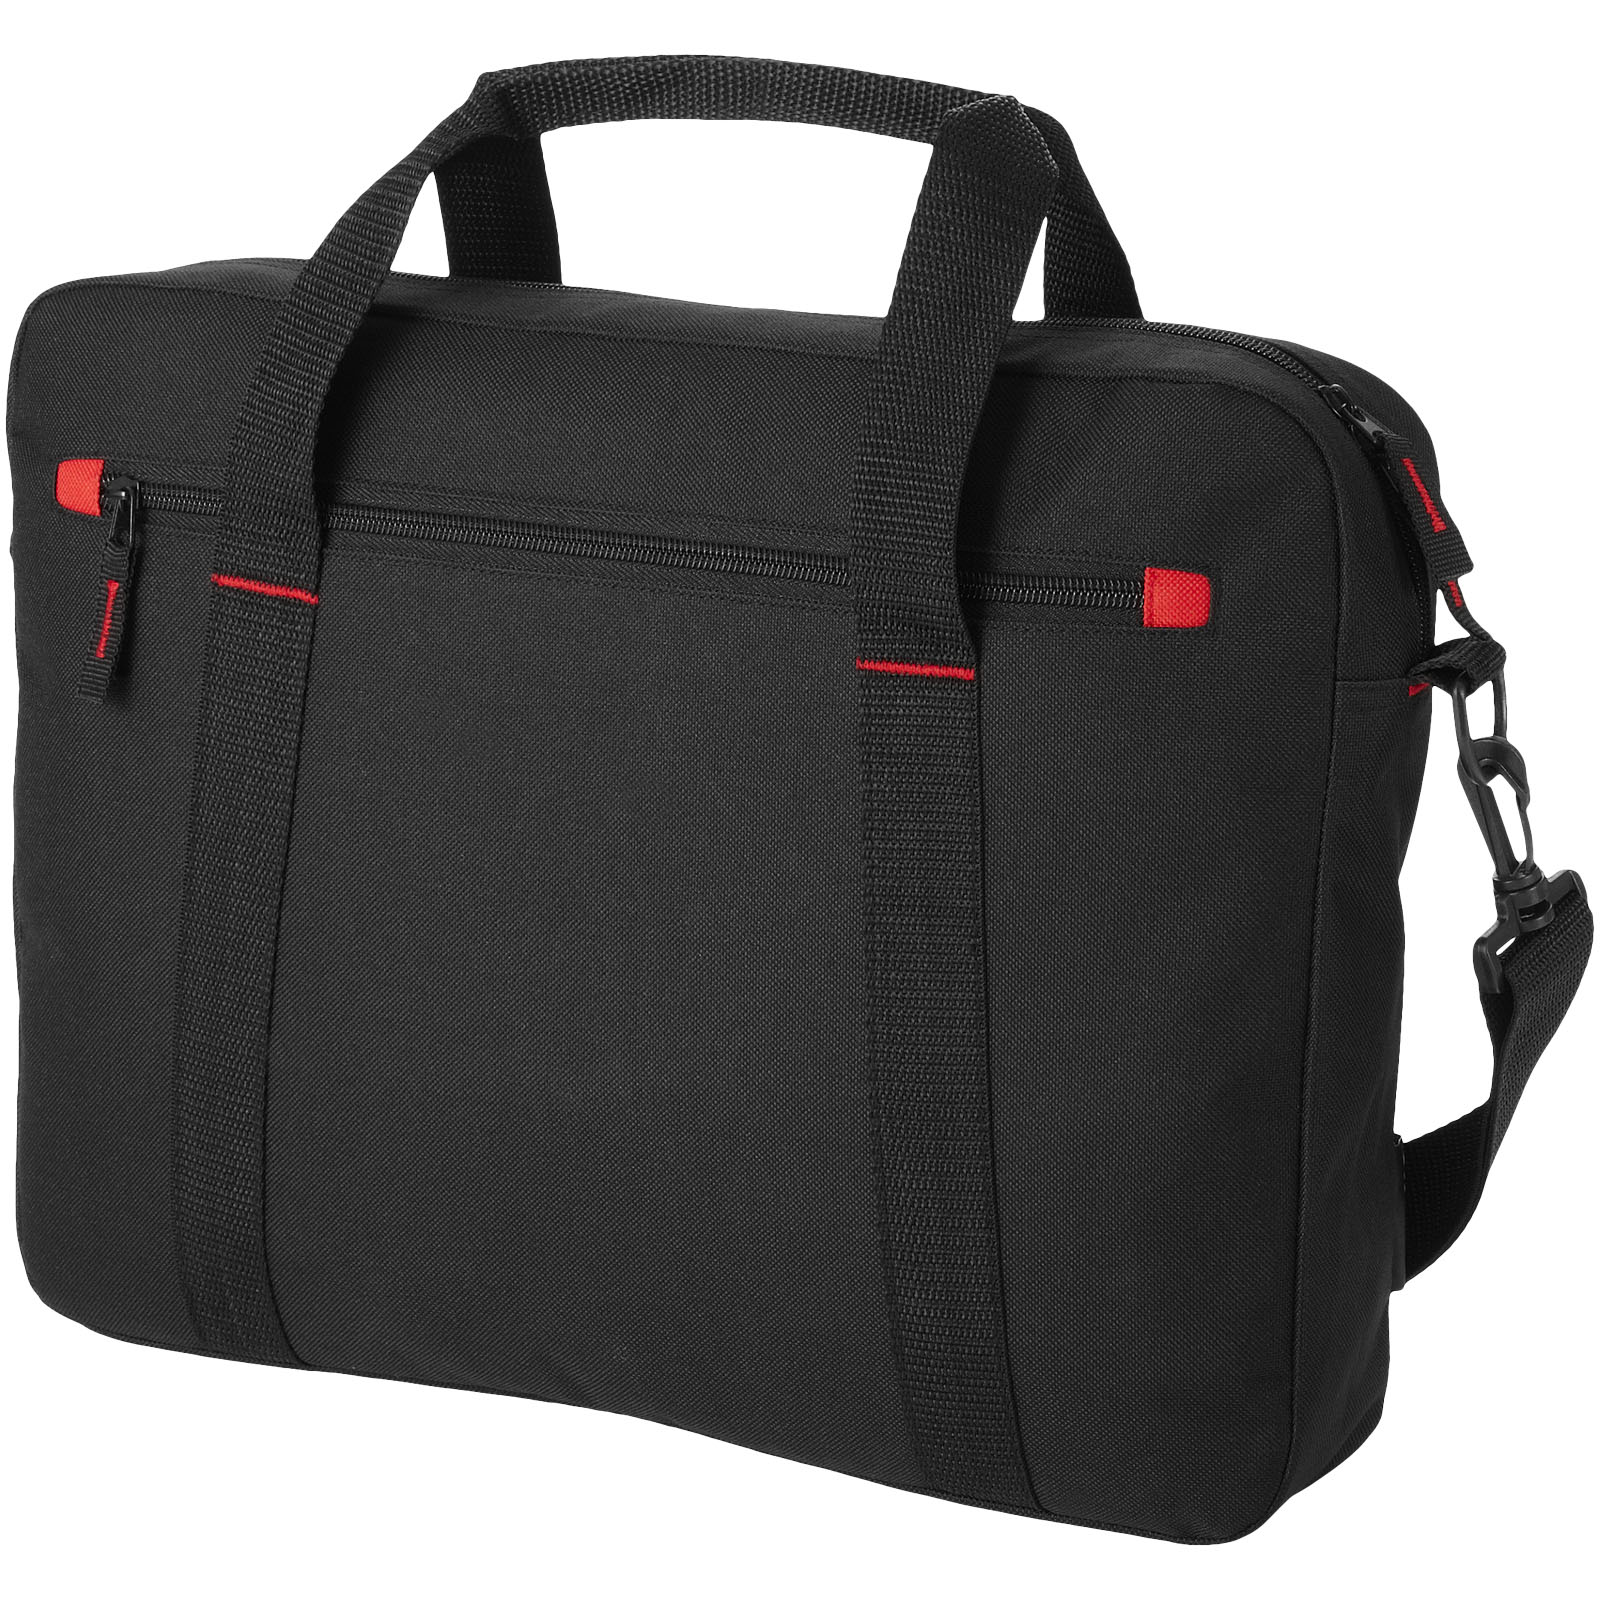 Advertising Laptop & Tablet bags - Vancouver 15.4